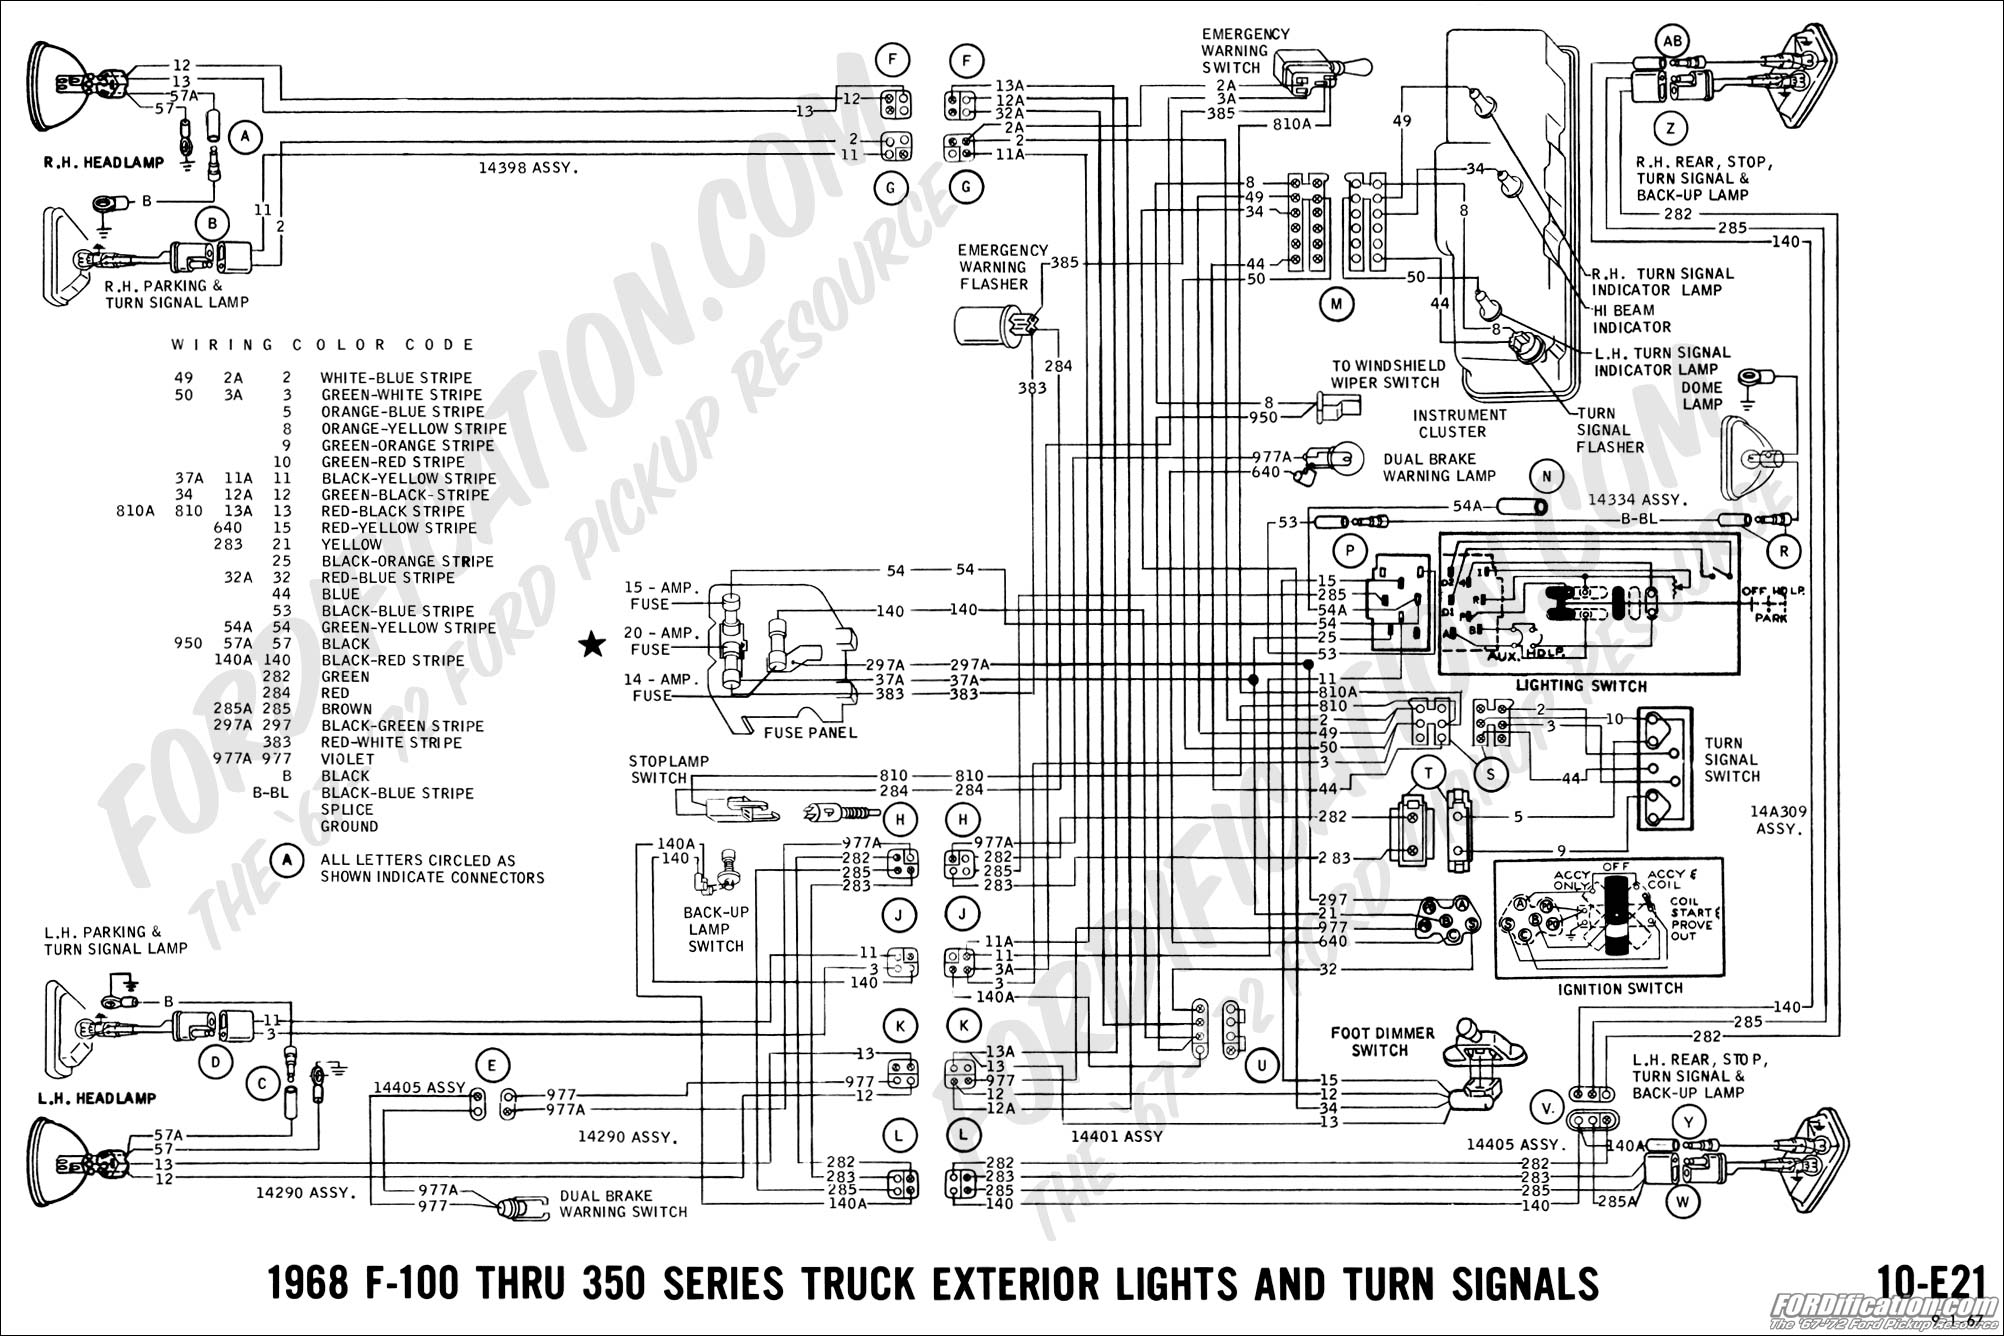 1974 Ford F250 Wiring Diagram from www.fordification.com